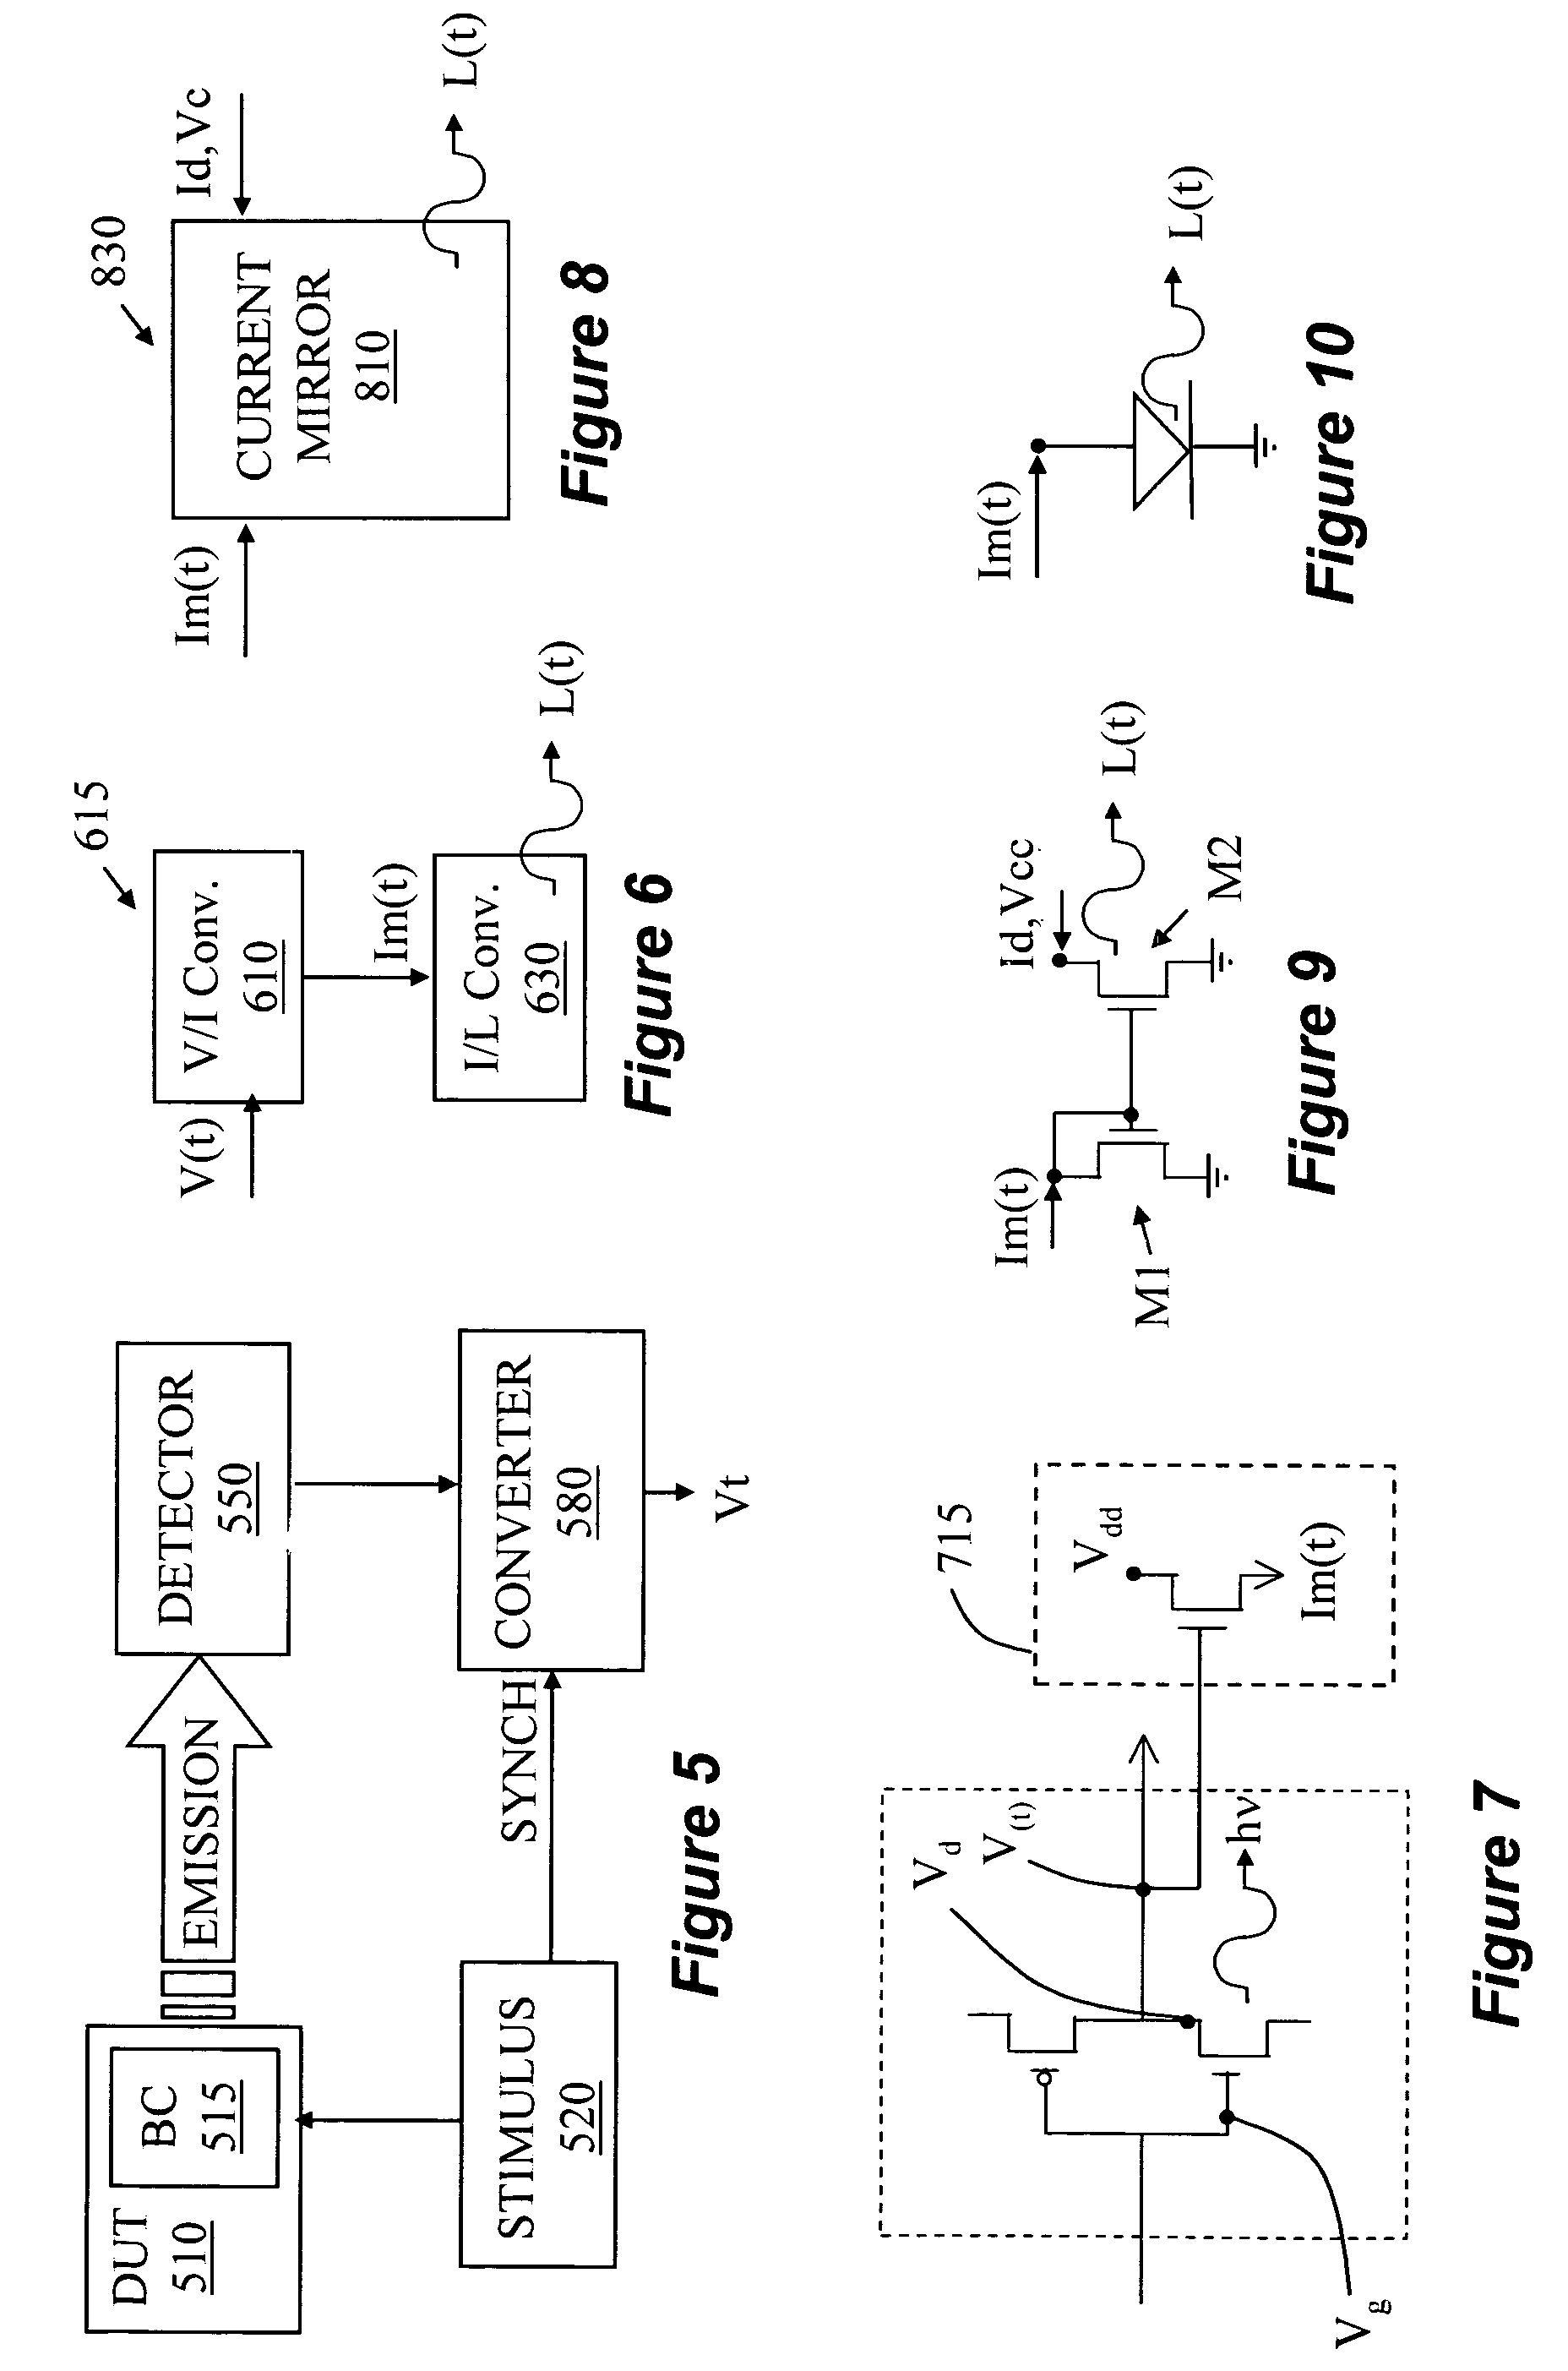 Apparatus and method for determining voltage using optical observation